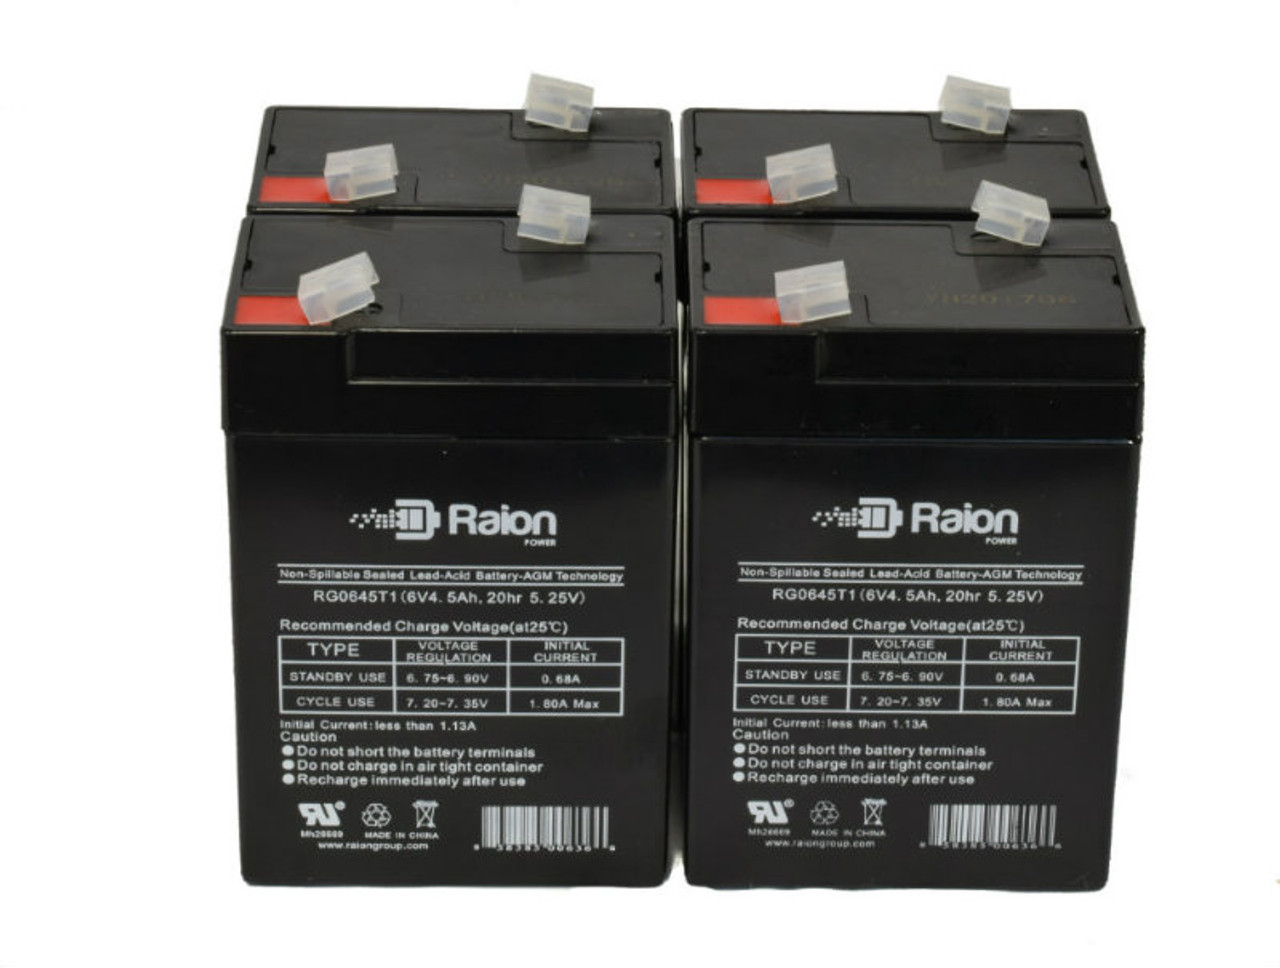 Raion Power RG0645T1 6V 4.5Ah Replacement Medical Equipment Battery for Nellcor N-600 Oximax - 4 Pack